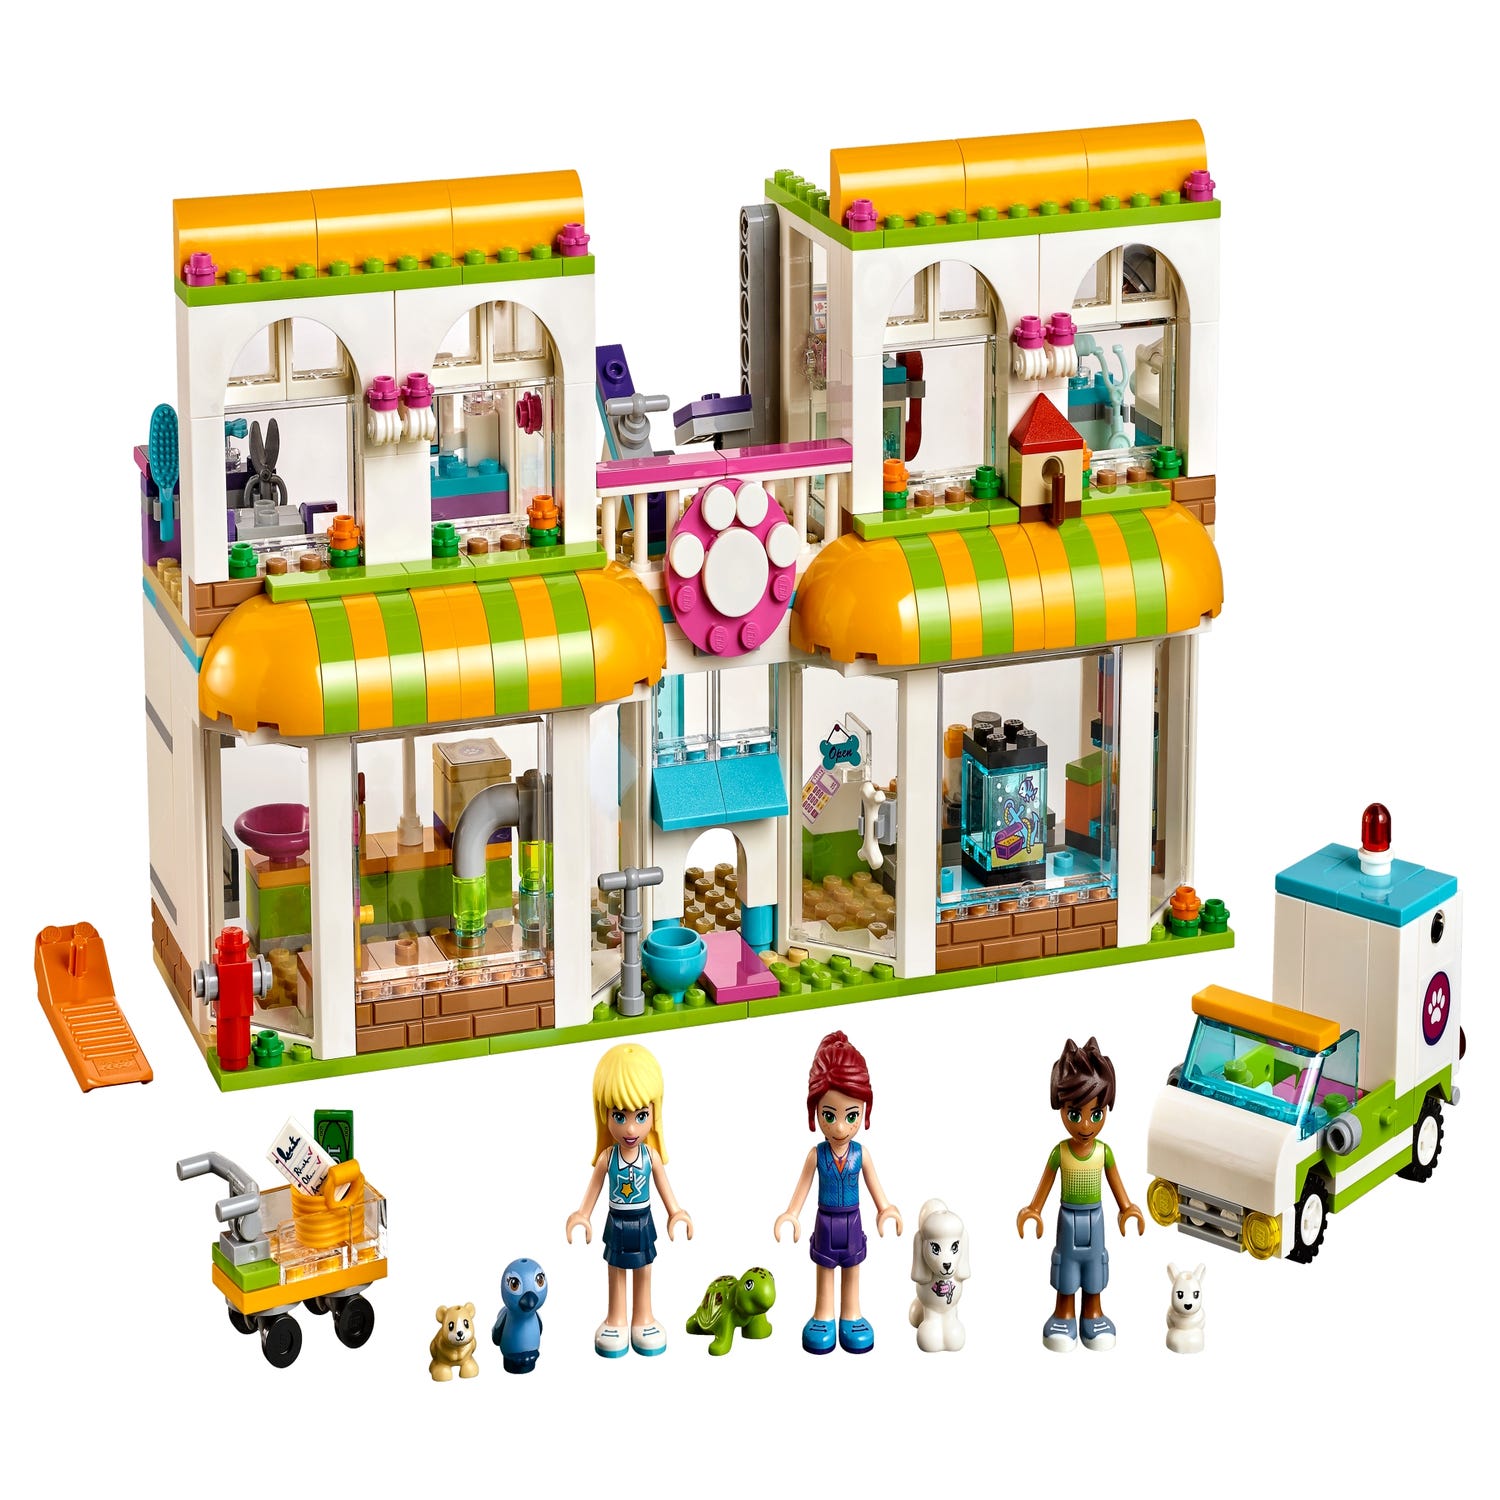 Heartlake City Pet Center 41345 | Friends Buy online at the Official LEGO® Shop US